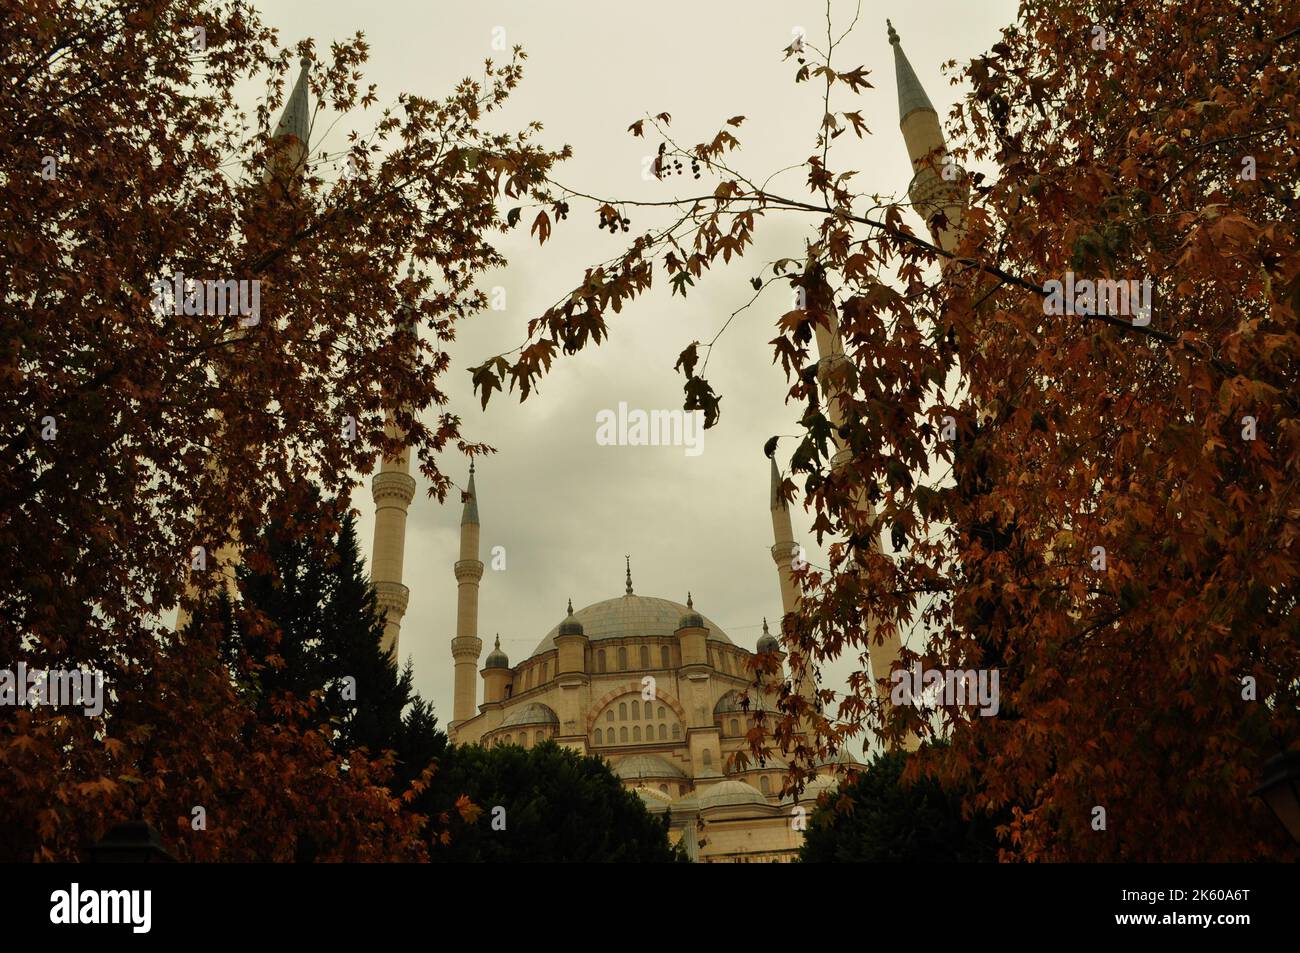 Adana Central Sabanci Mosque, Mosque seen from within the frame among the dried leaves Adana Turkey. House of worship idea concept. No people. Stock Photo